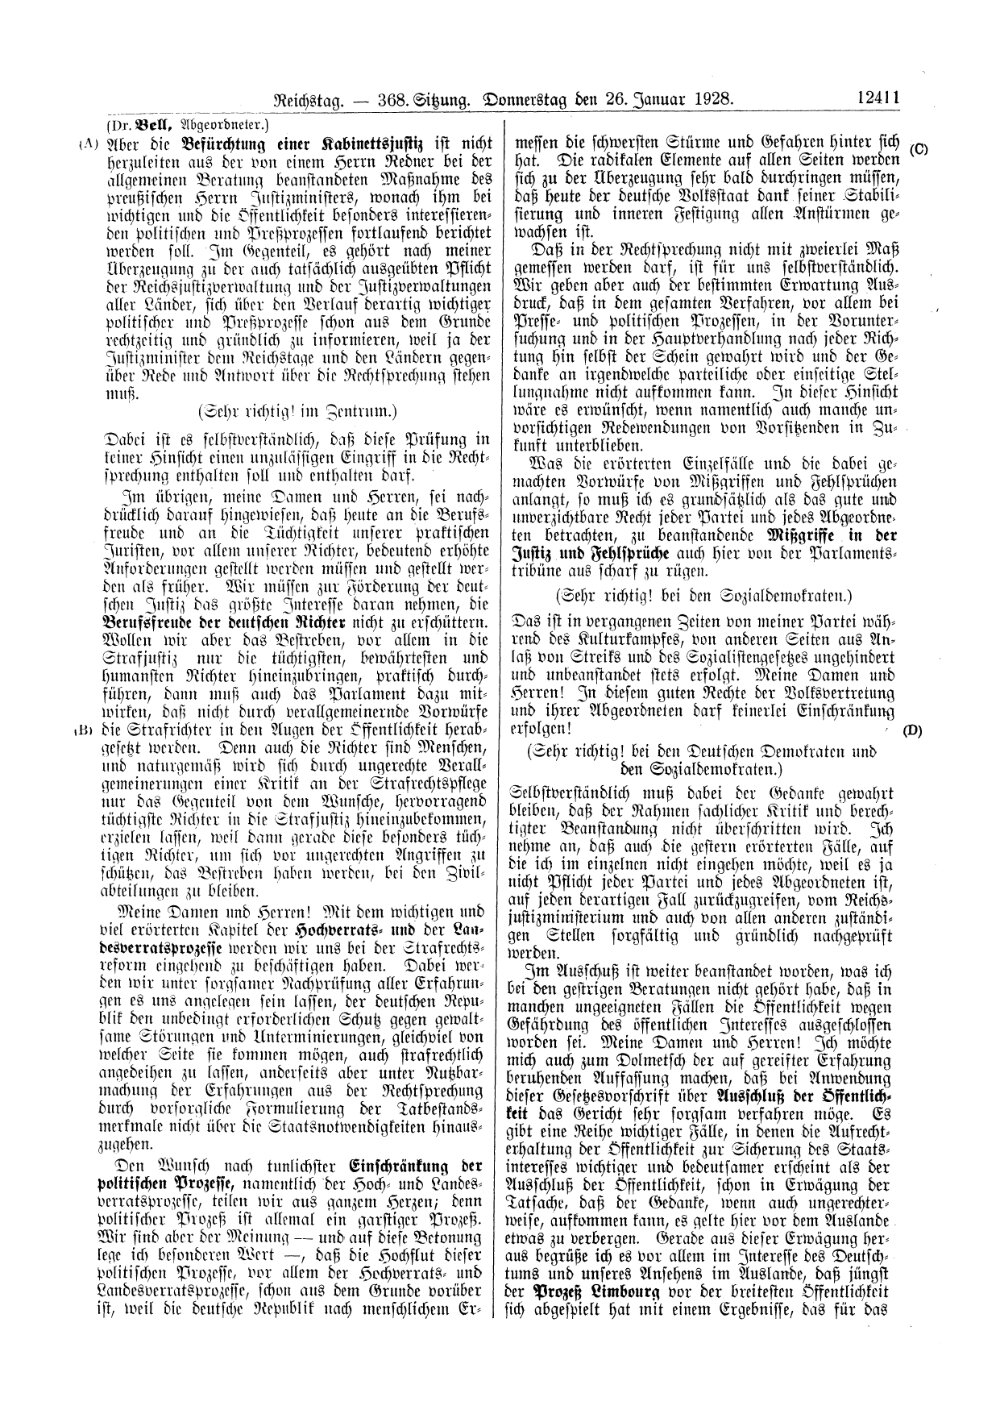 Scan of page 12411